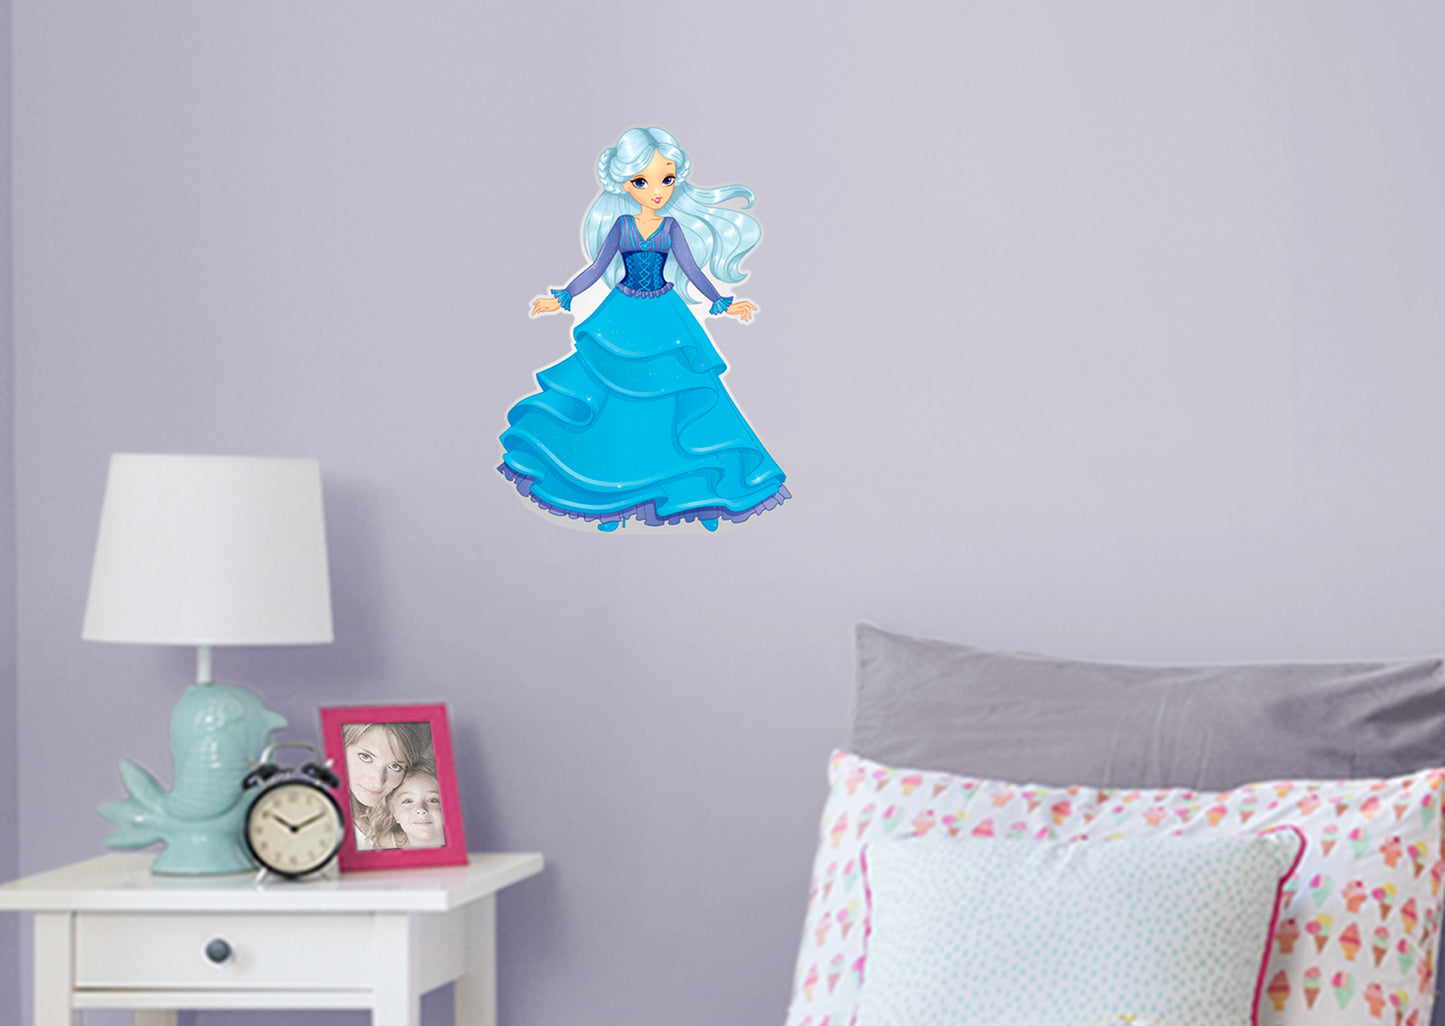 Nursery: Princess Fancy Princess Part One Character        -   Removable Wall   Adhesive Decal